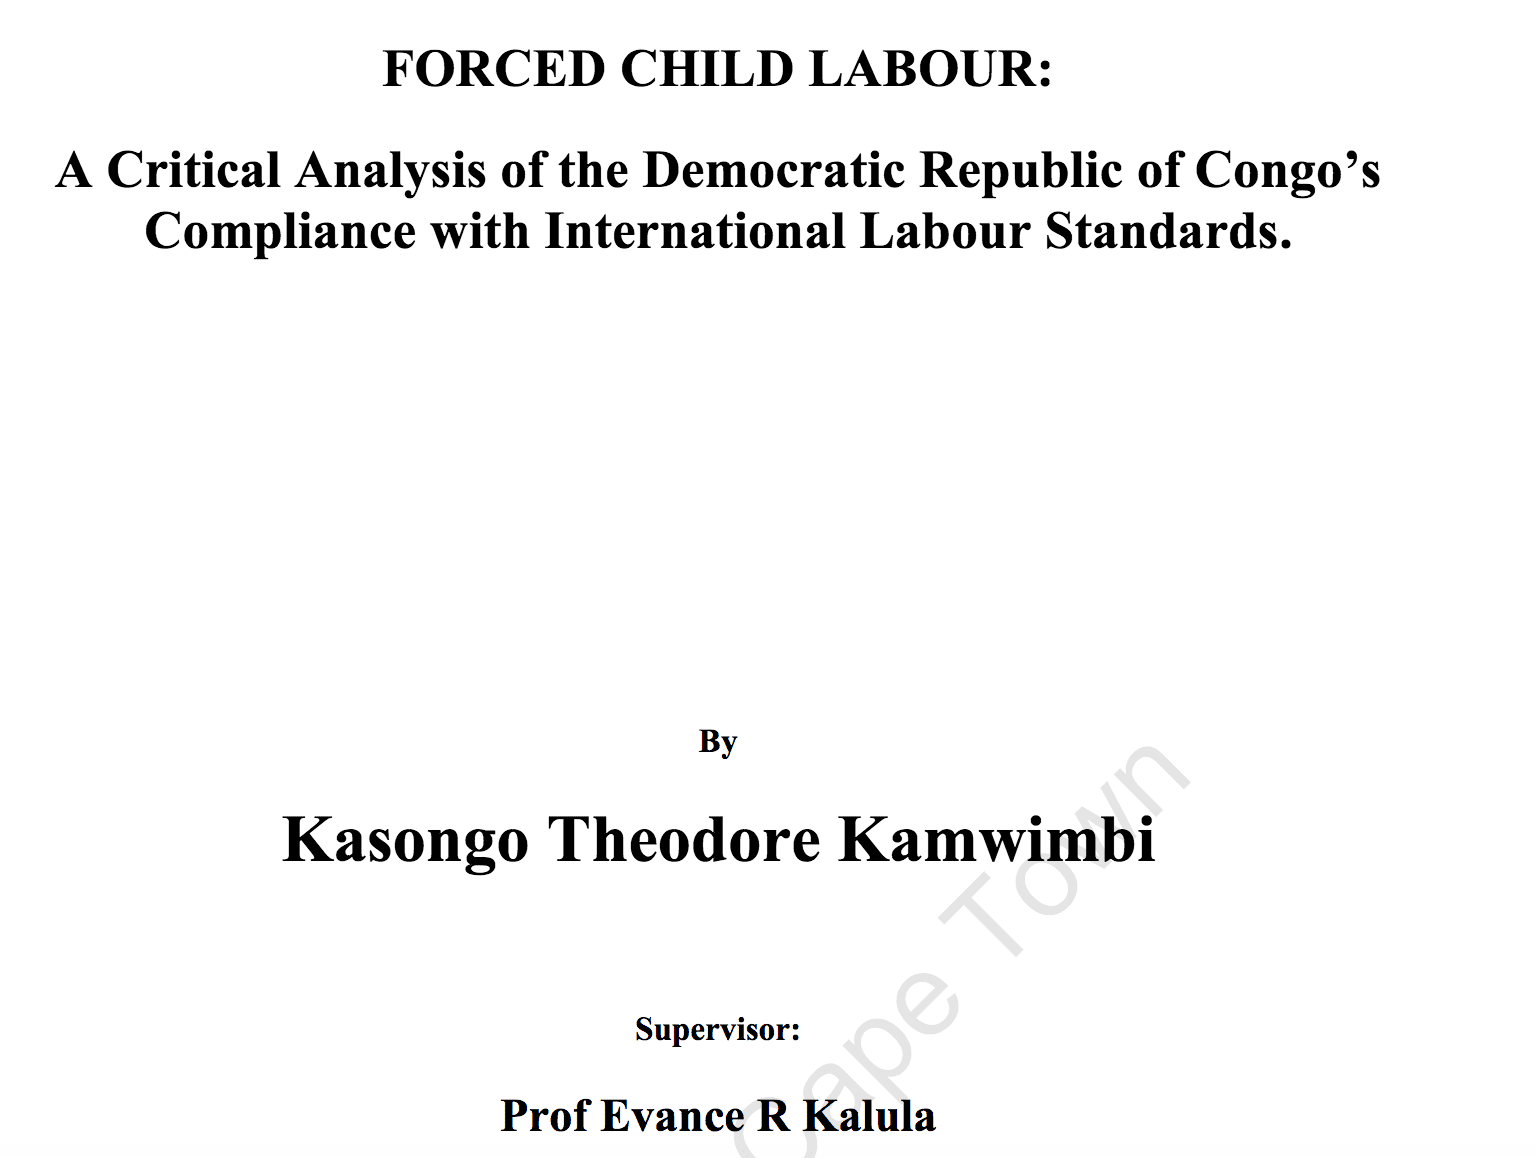 Forced child labour: A critical analysis of the Democratic Republic of Congo’s compliance with international labour standards